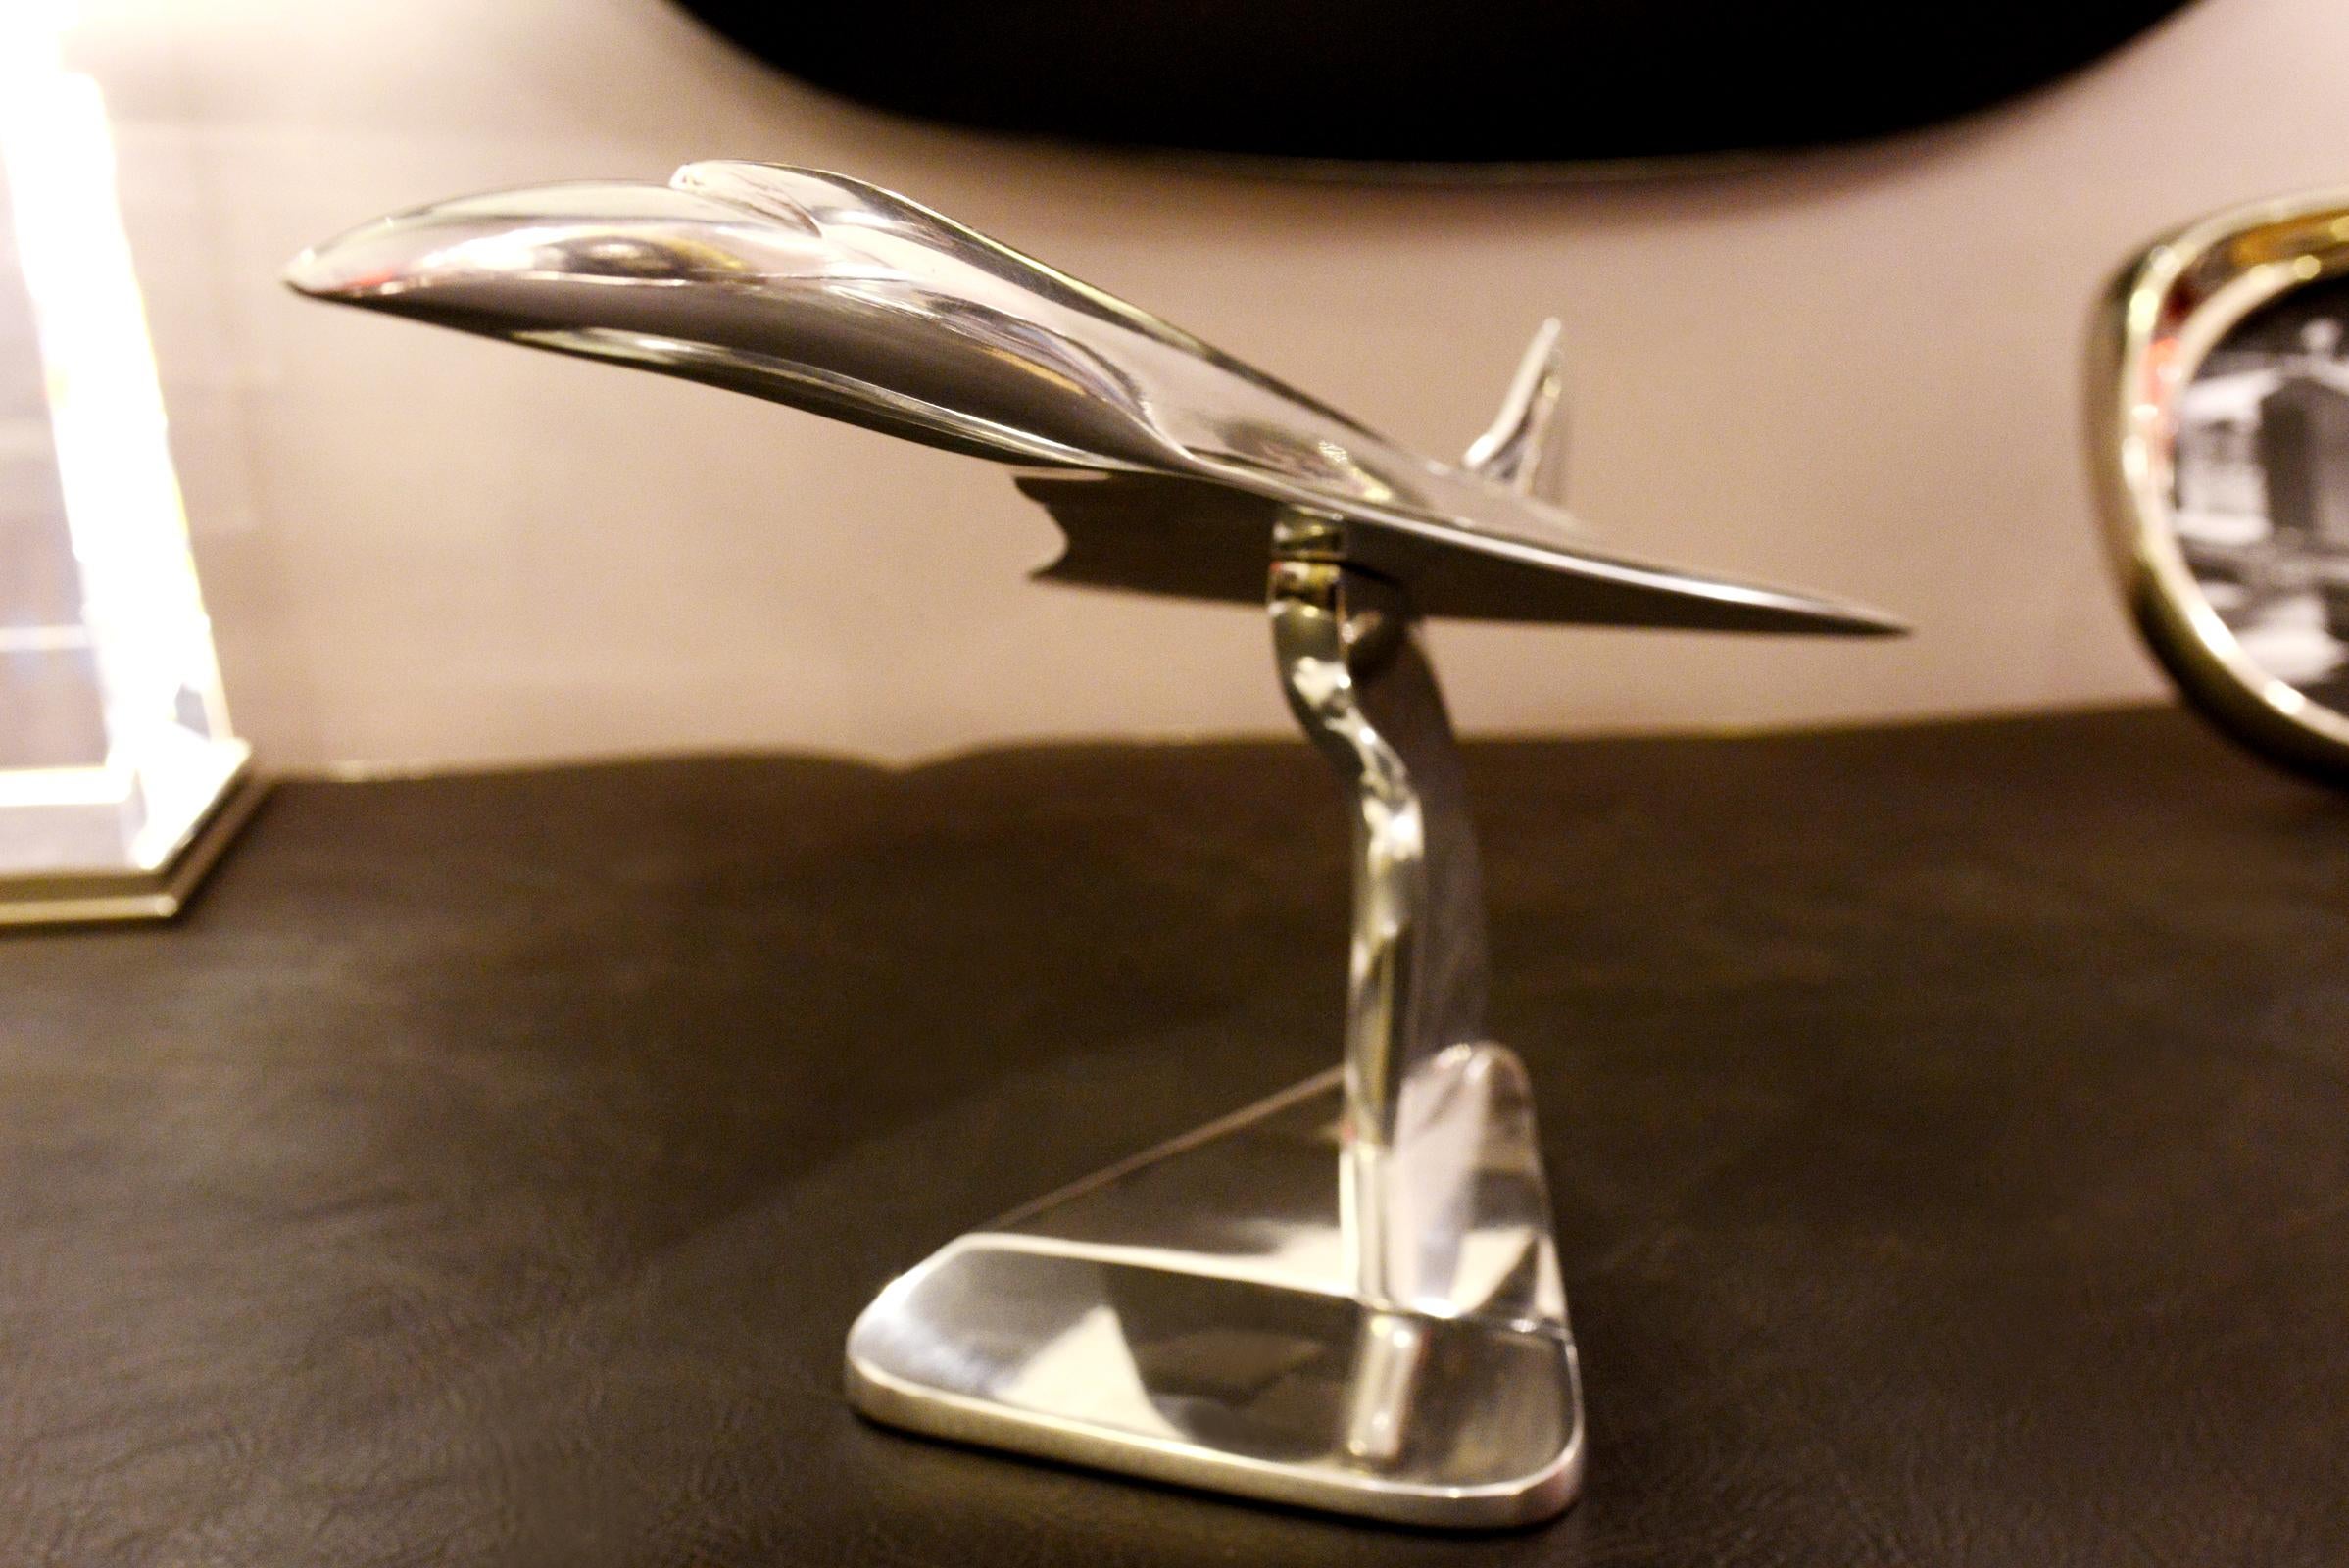 Polished Concorde Model Supersonic Aircraft